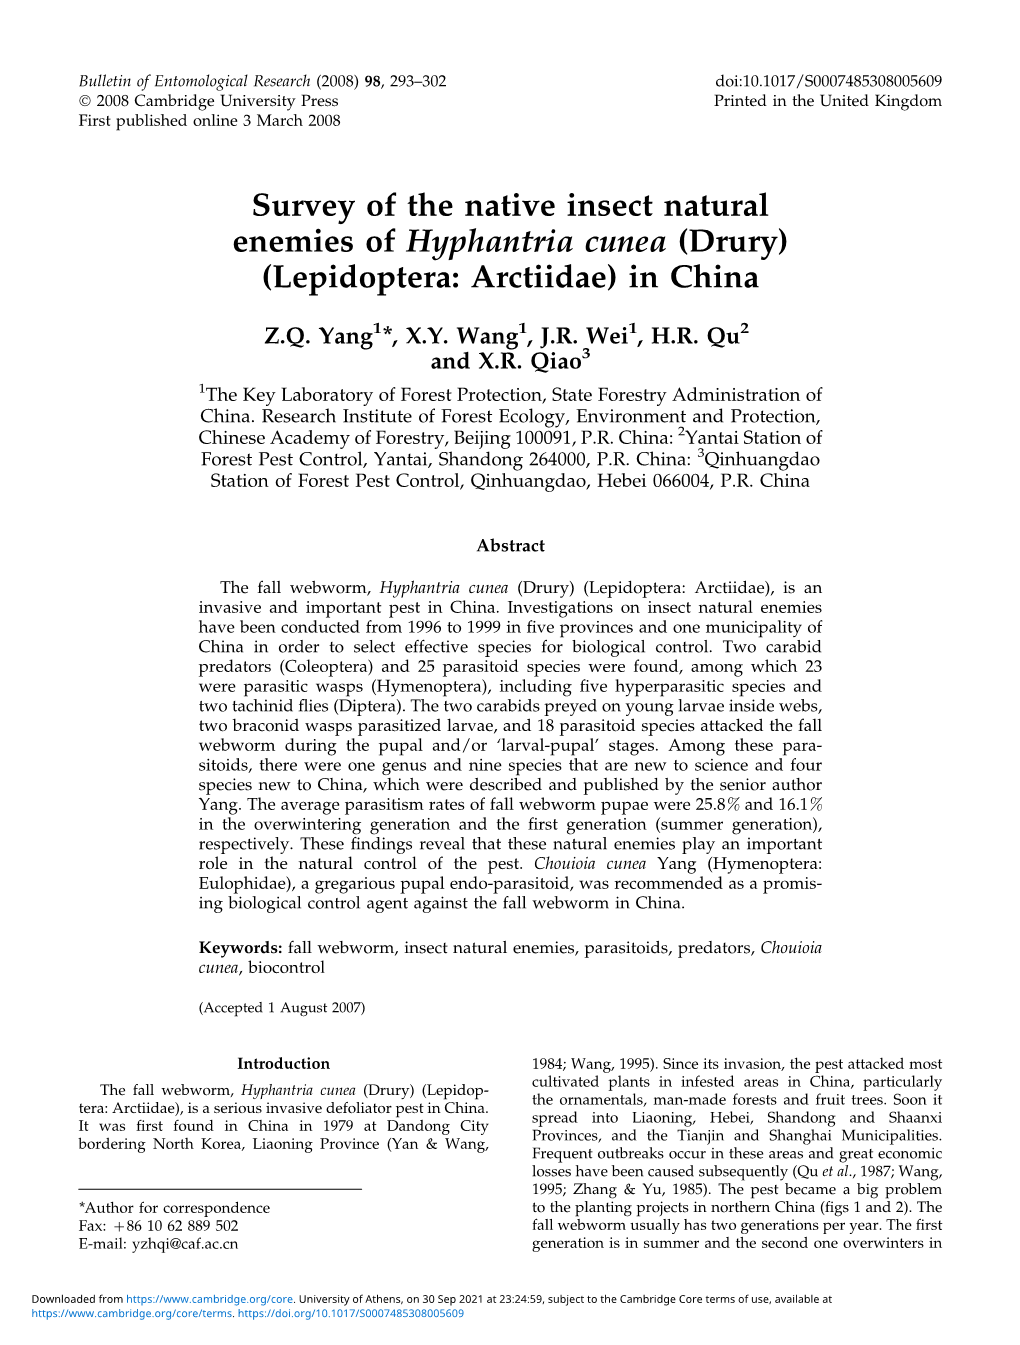 Survey of the Native Insect Natural Enemies of Hyphantria Cunea (Drury) (Lepidoptera: Arctiidae) in China